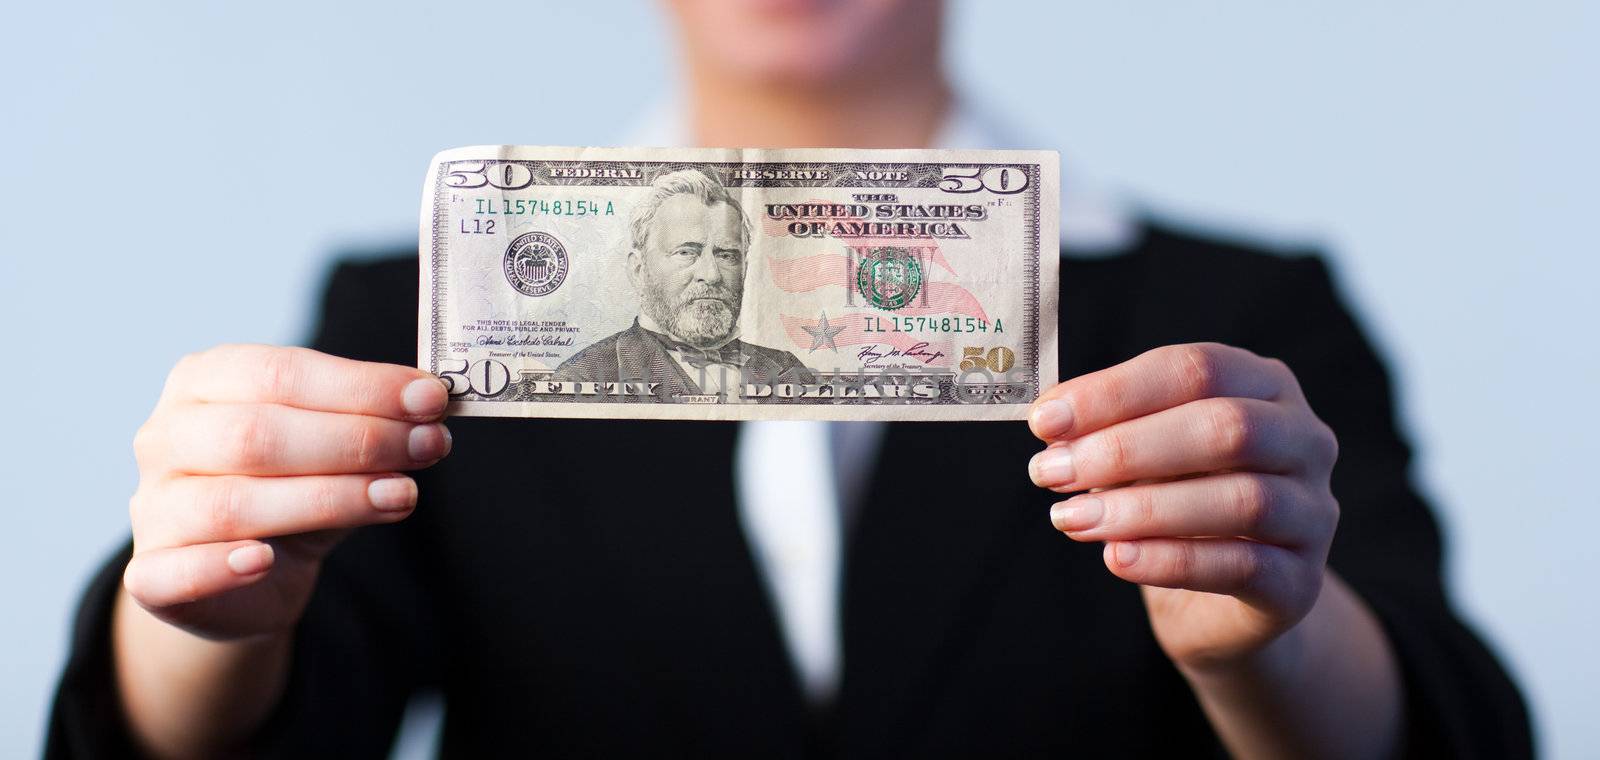 Business woman holding up dollars with camera focus on the dollars